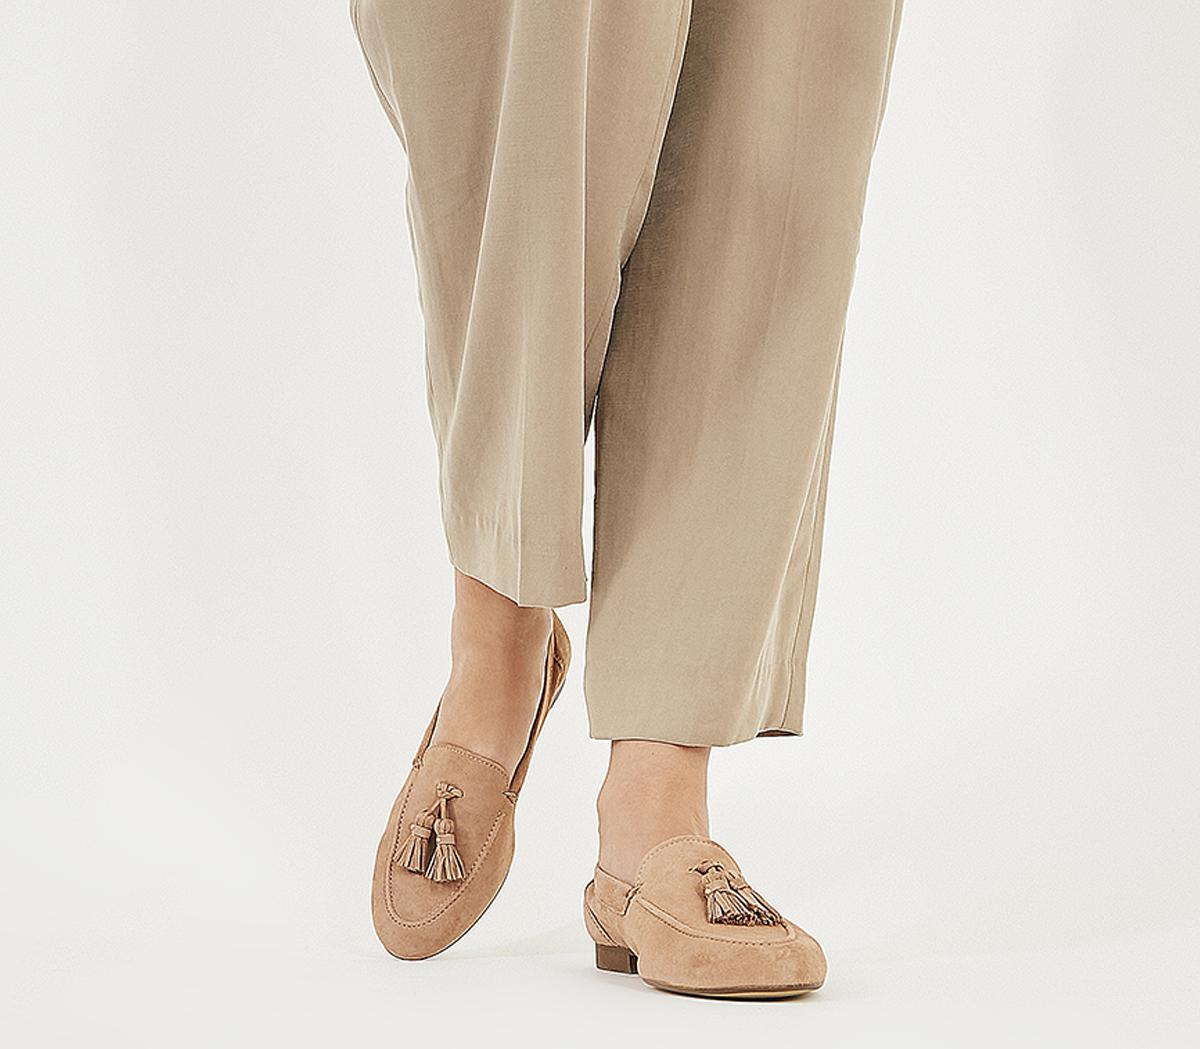 OFFICERetro Tassel LoafersNew Nude Suede